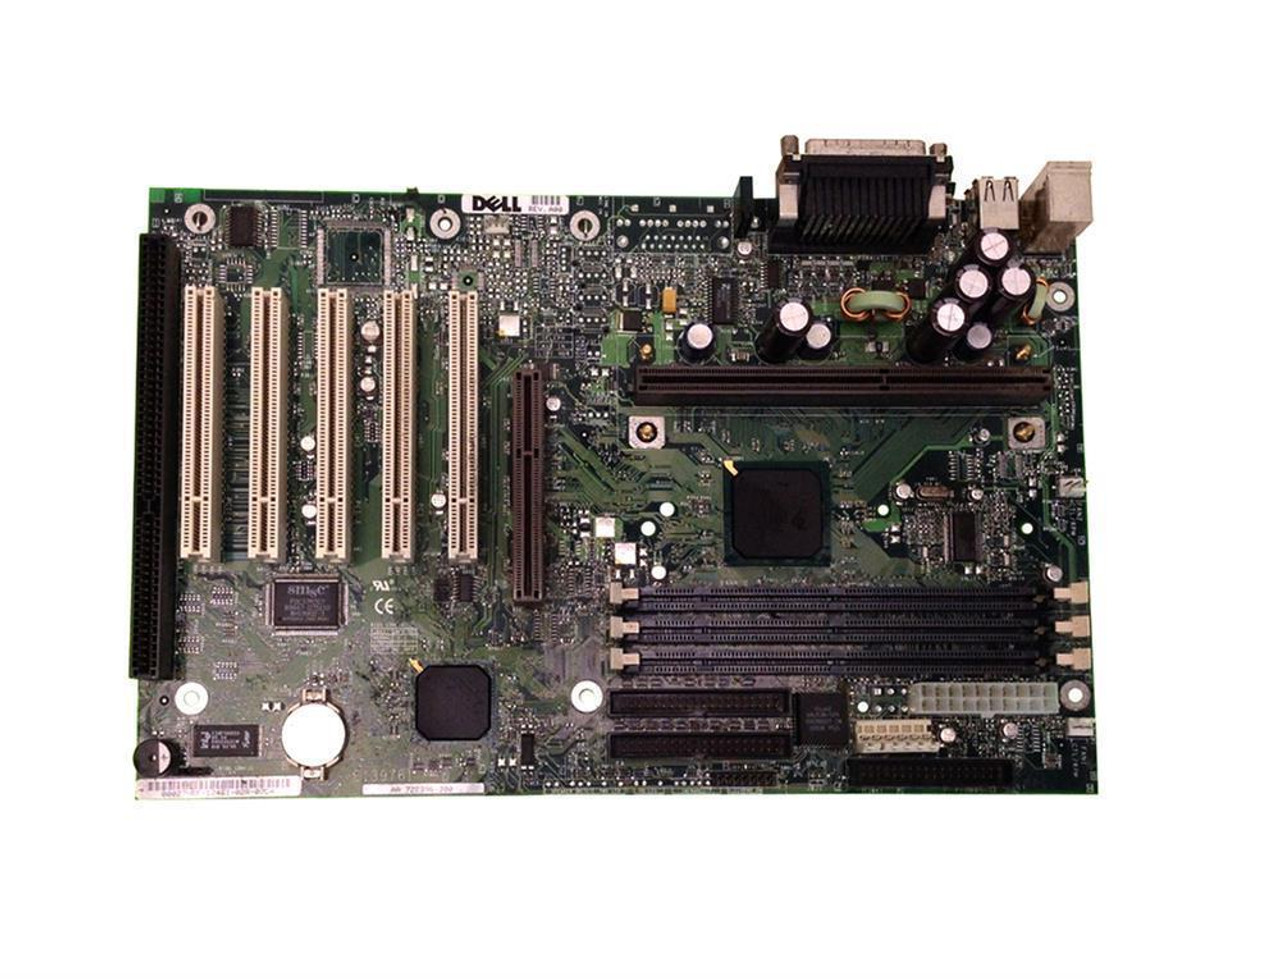 007335T Dell System Board (Motherboard) For Dimension Xps T (Refurbished)